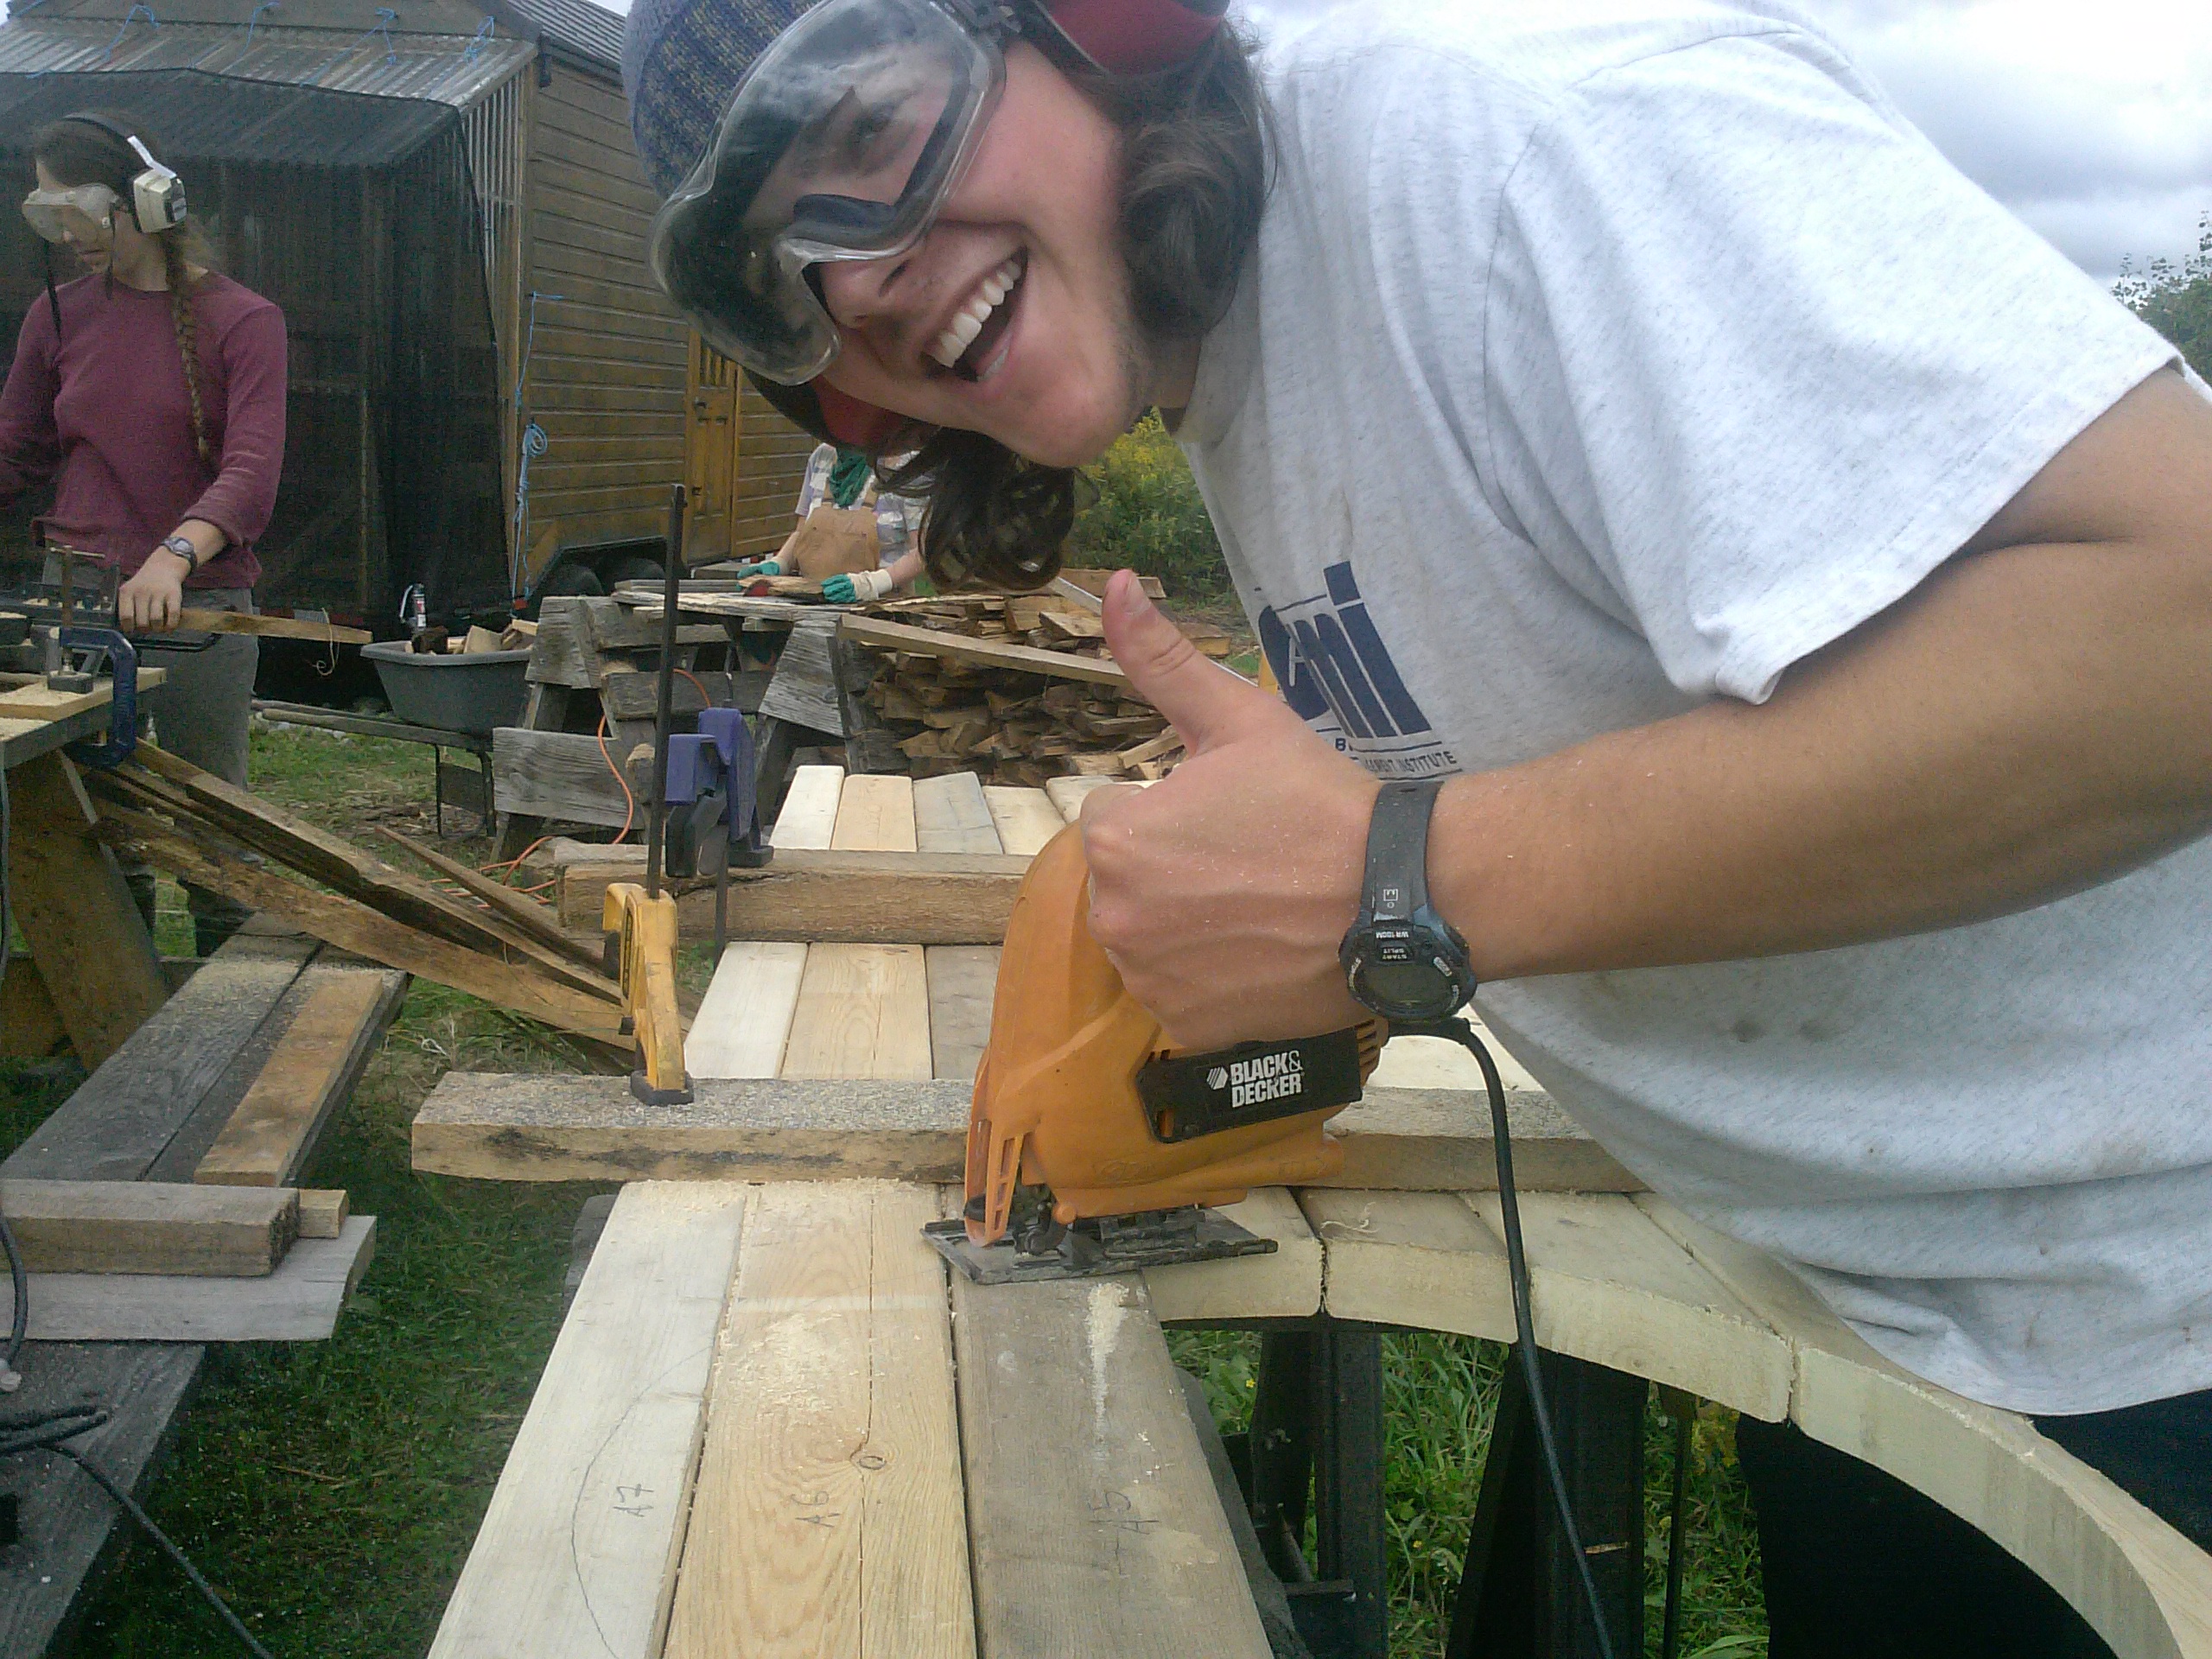 Permaculture intern using jigsaw to cut a circle out of wood